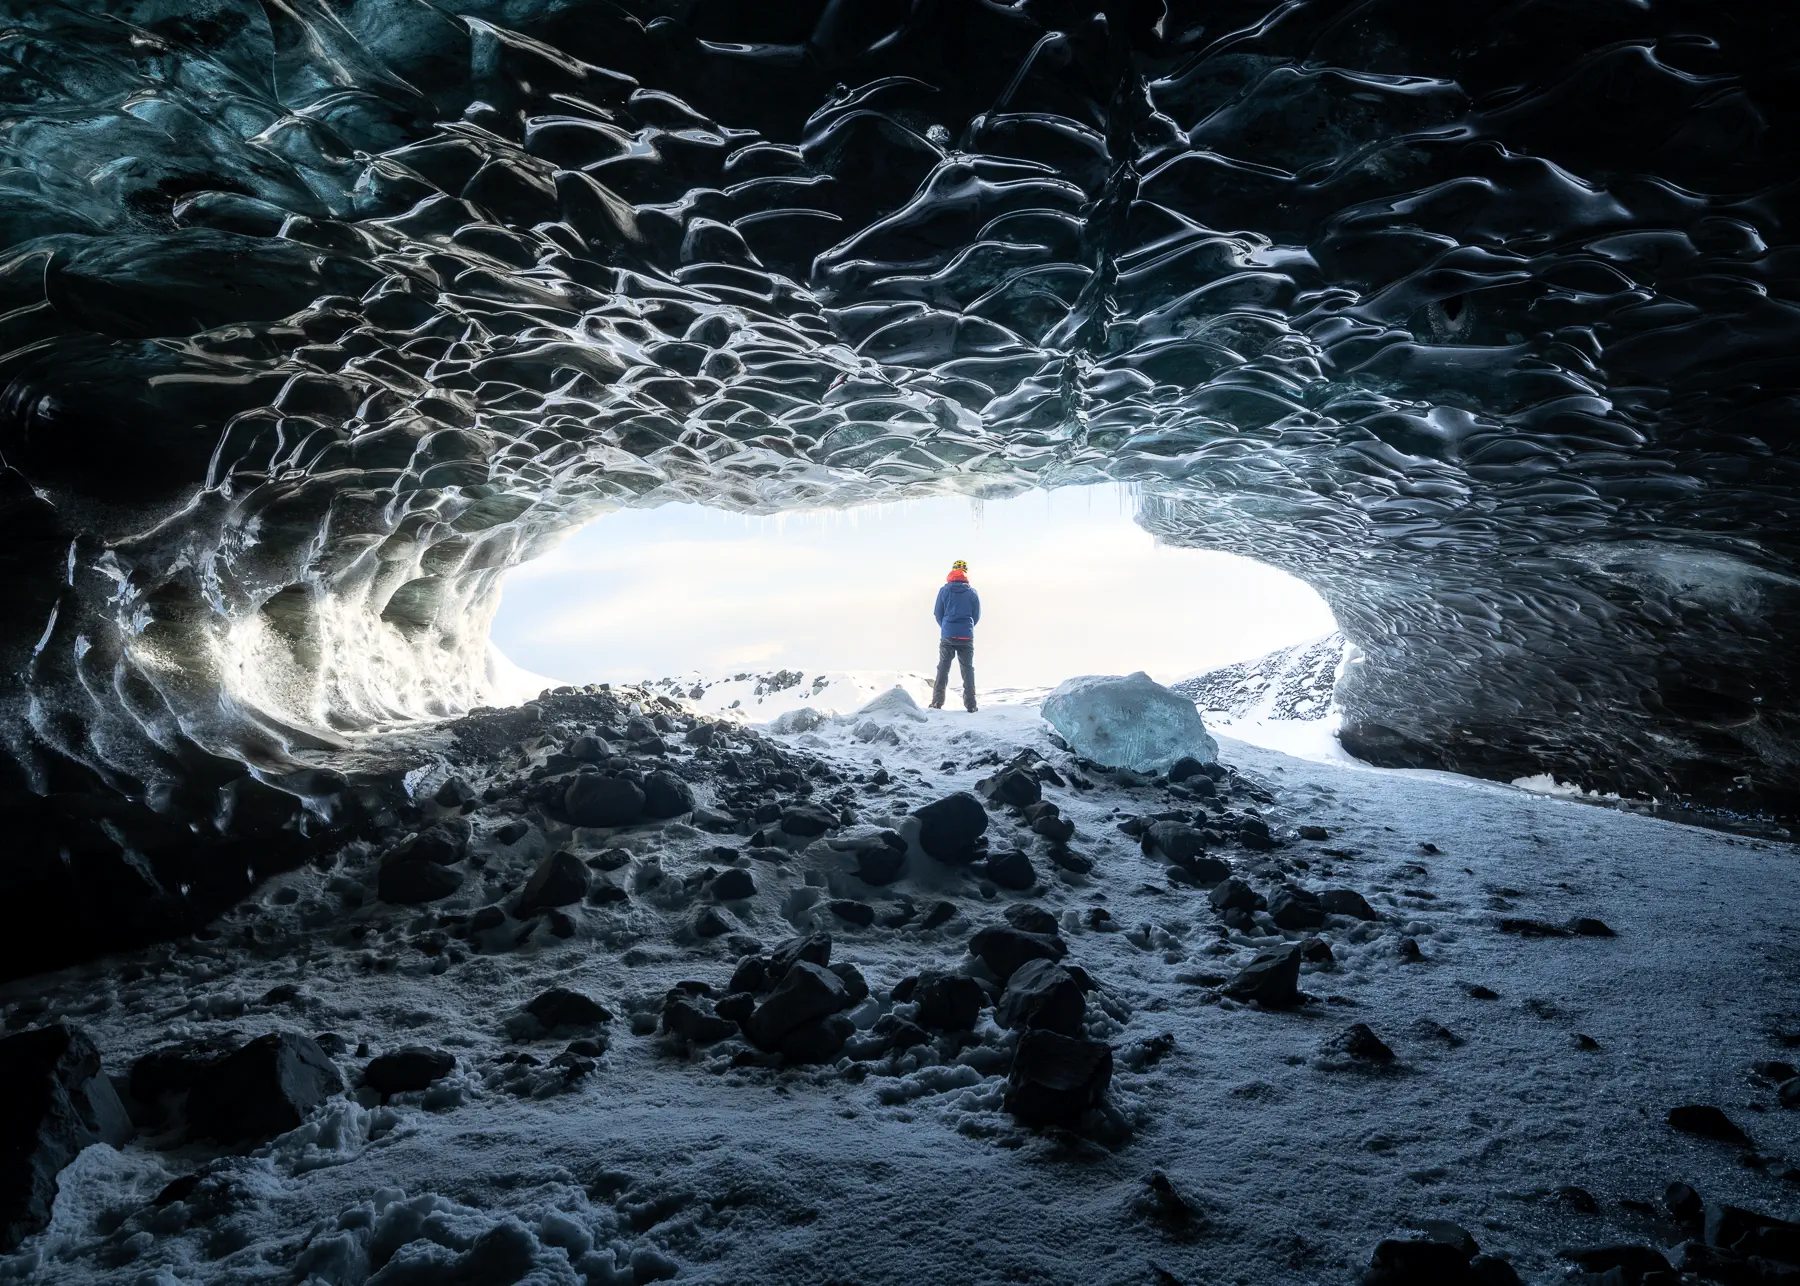 Self-portrait in an ice cave